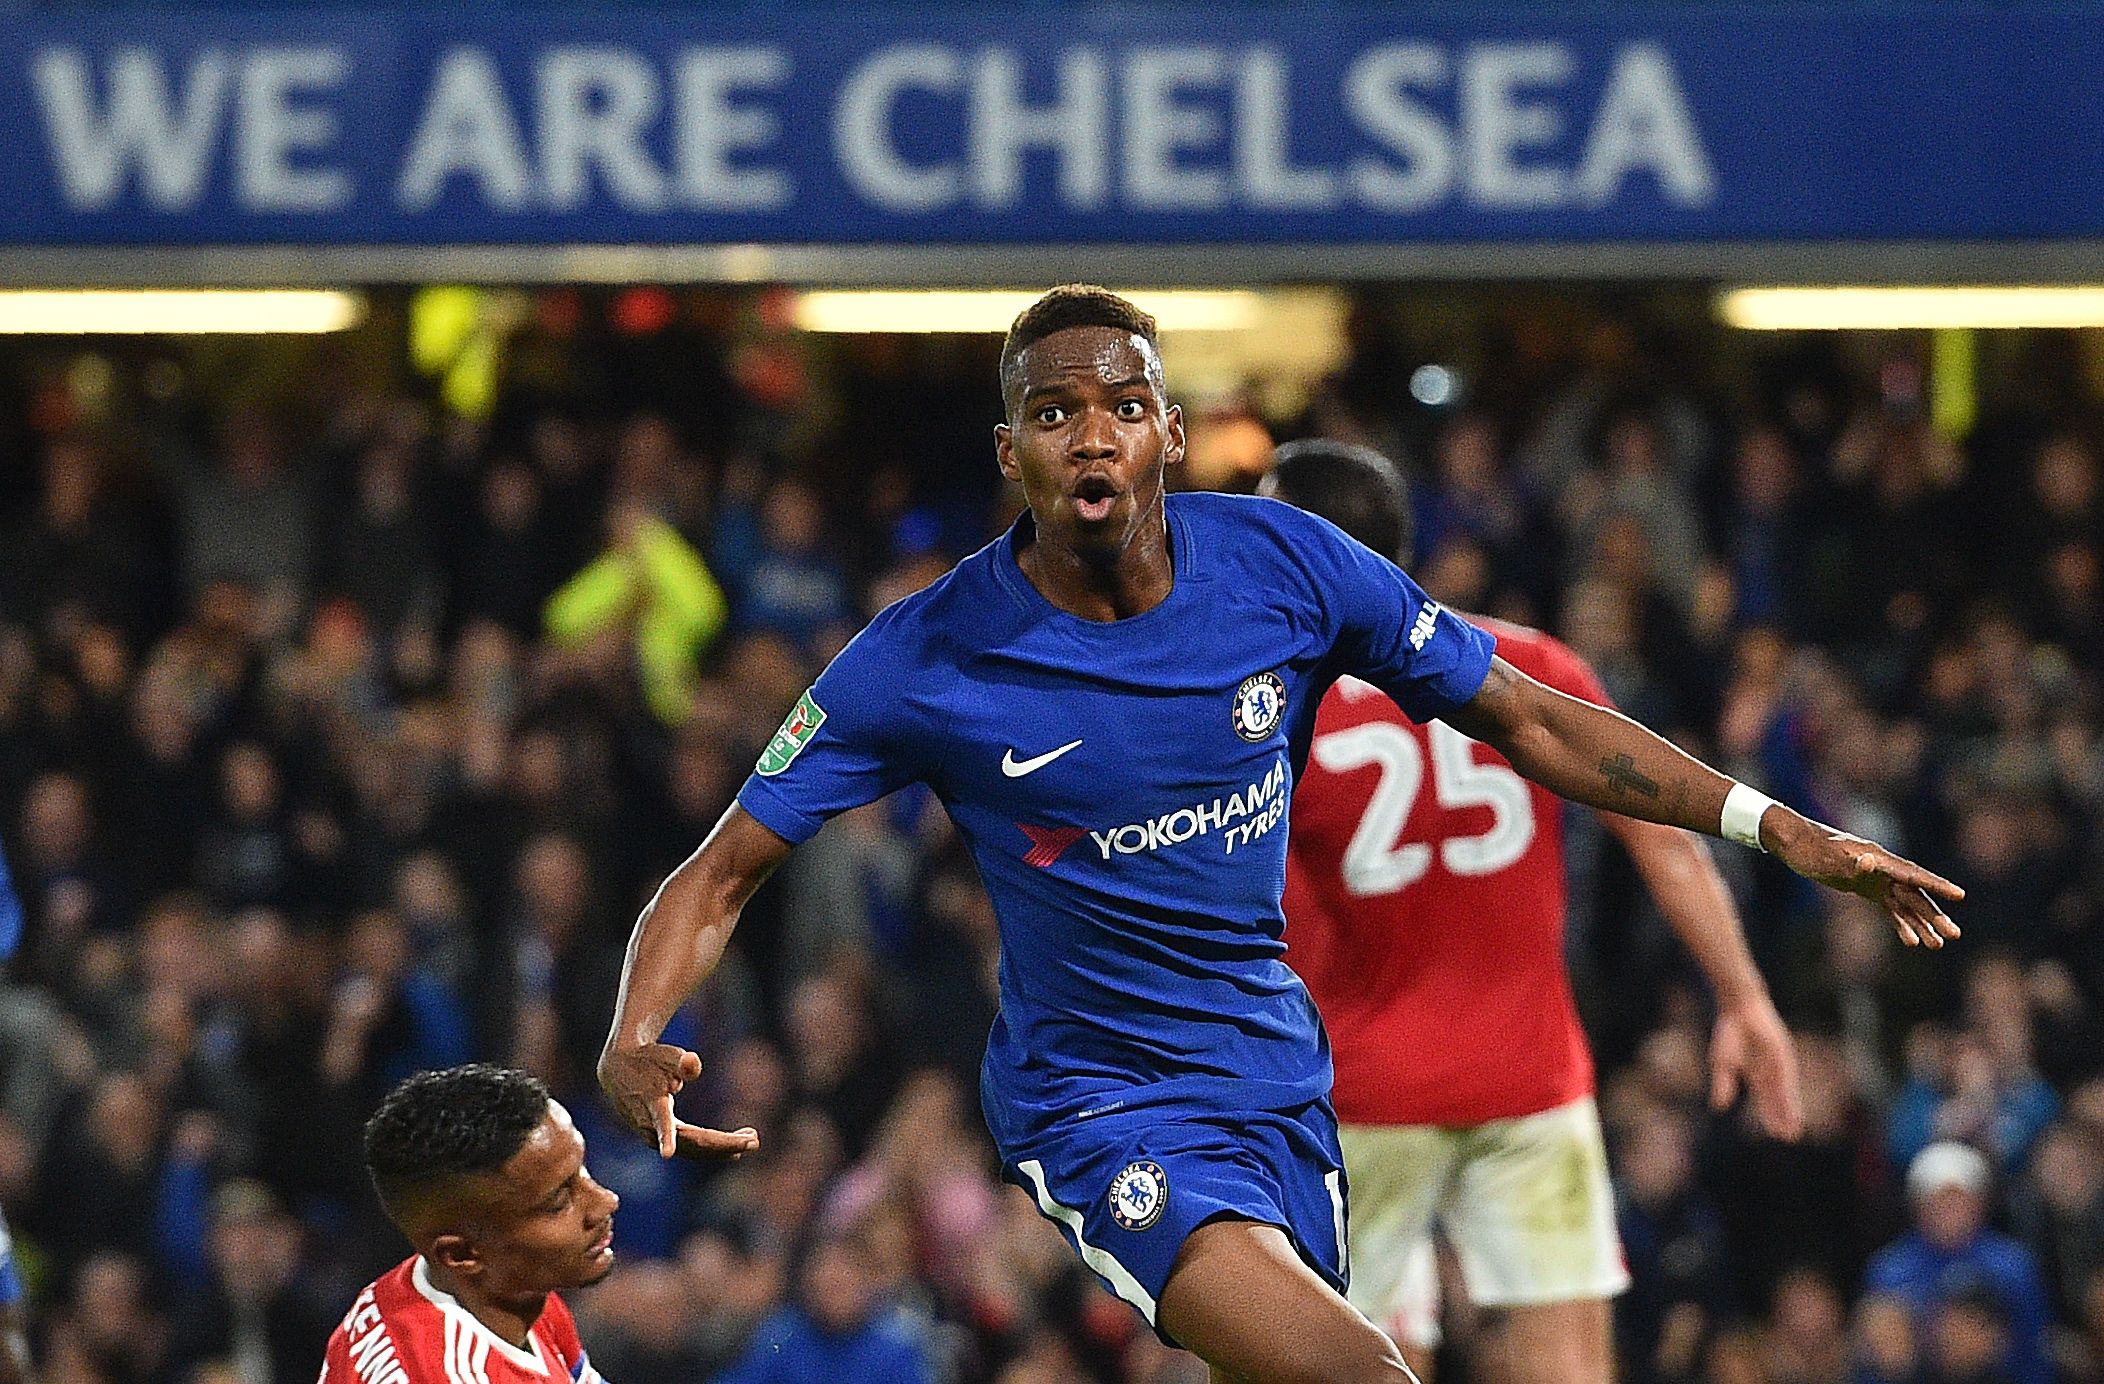 Chelsea's Belgian midfielder Charly Musonda celebrates scoring his team's third goal during the English League Cup third round football match between Chelsea and Nottingham Forest at Stamford Bridge in London on September 20, 2017. / AFP PHOTO / Glyn KIRK / RESTRICTED TO EDITORIAL USE. No use with unauthorized audio, video, data, fixture lists, club/league logos or 'live' services. Online in-match use limited to 75 images, no video emulation. No use in betting, games or single club/league/player publications.  /         (Photo credit should read GLYN KIRK/AFP/Getty Images)